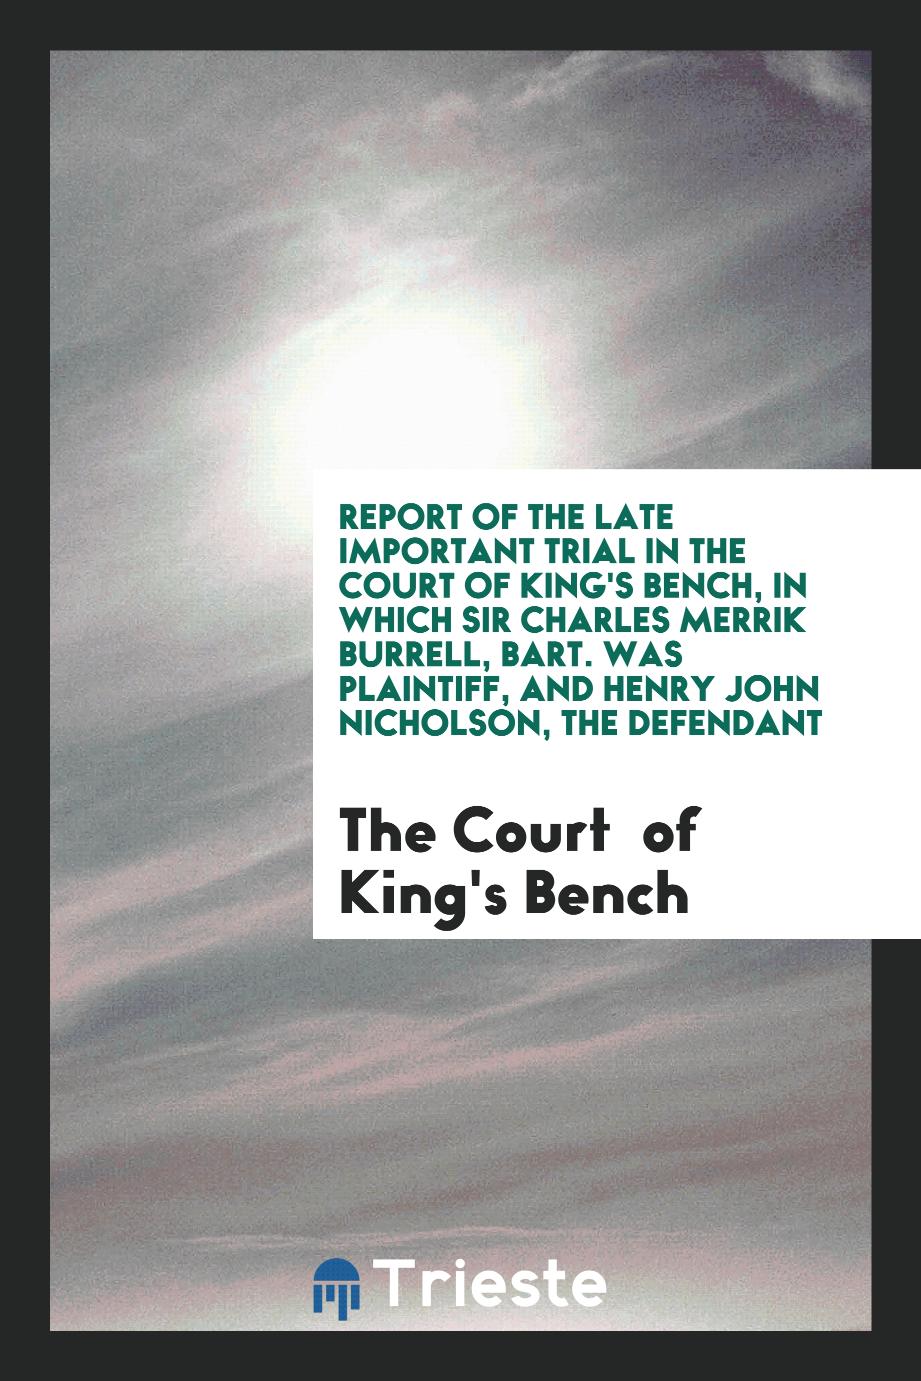 Report of the Late Important Trial in the Court of King's Bench, in Which Sir Charles Merrik Burrell, Bart. Was Plaintiff, and Henry John Nicholson, the Defendant